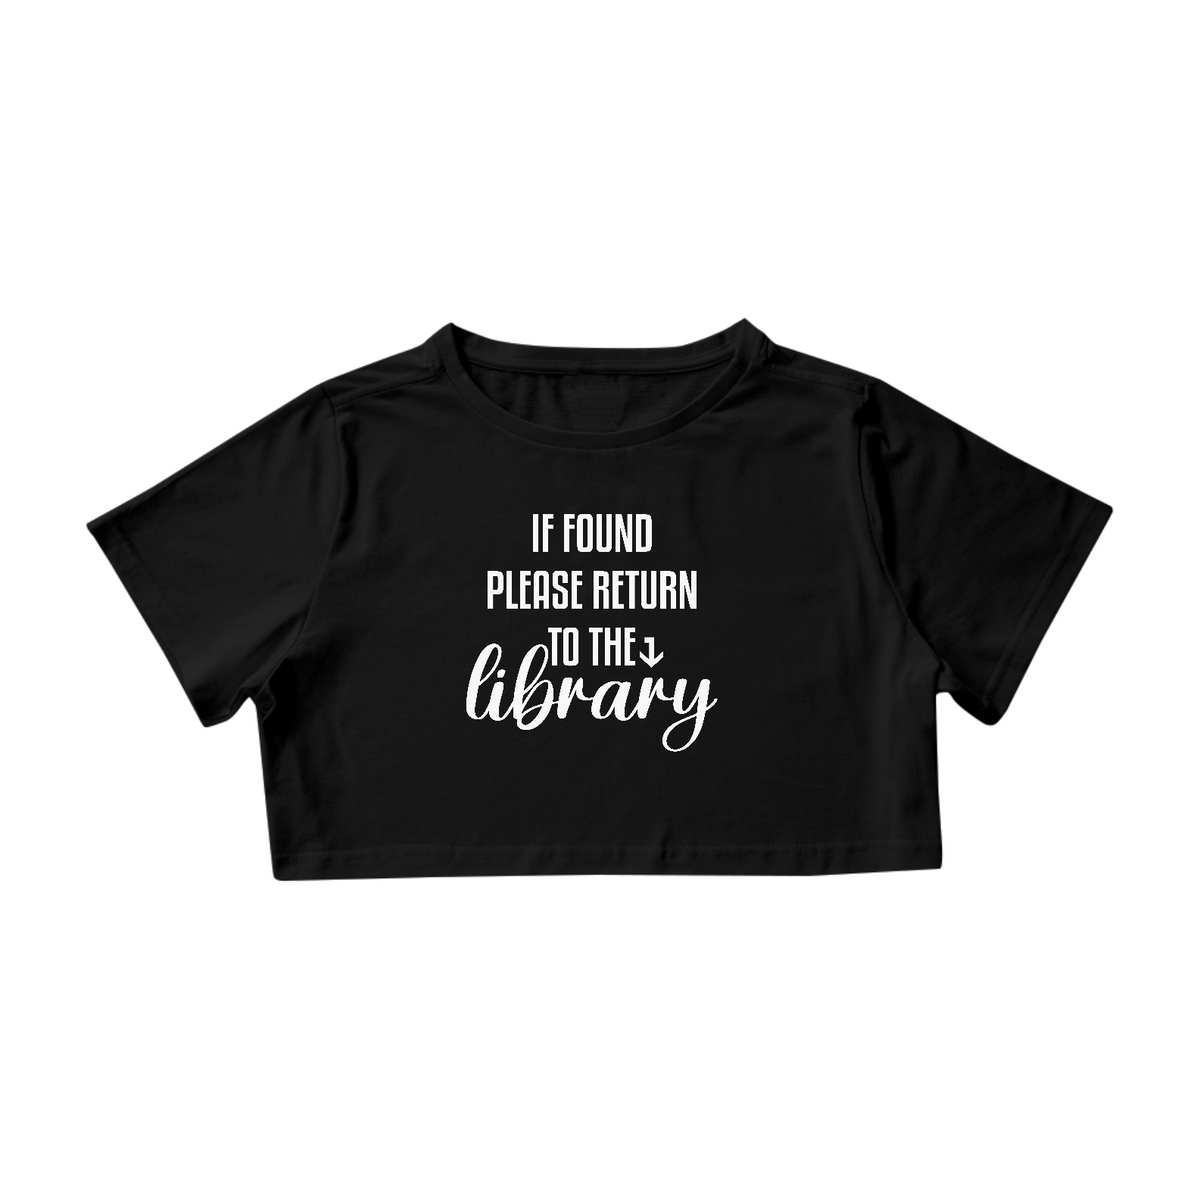 Nome do produto: Cropped Return To The Library